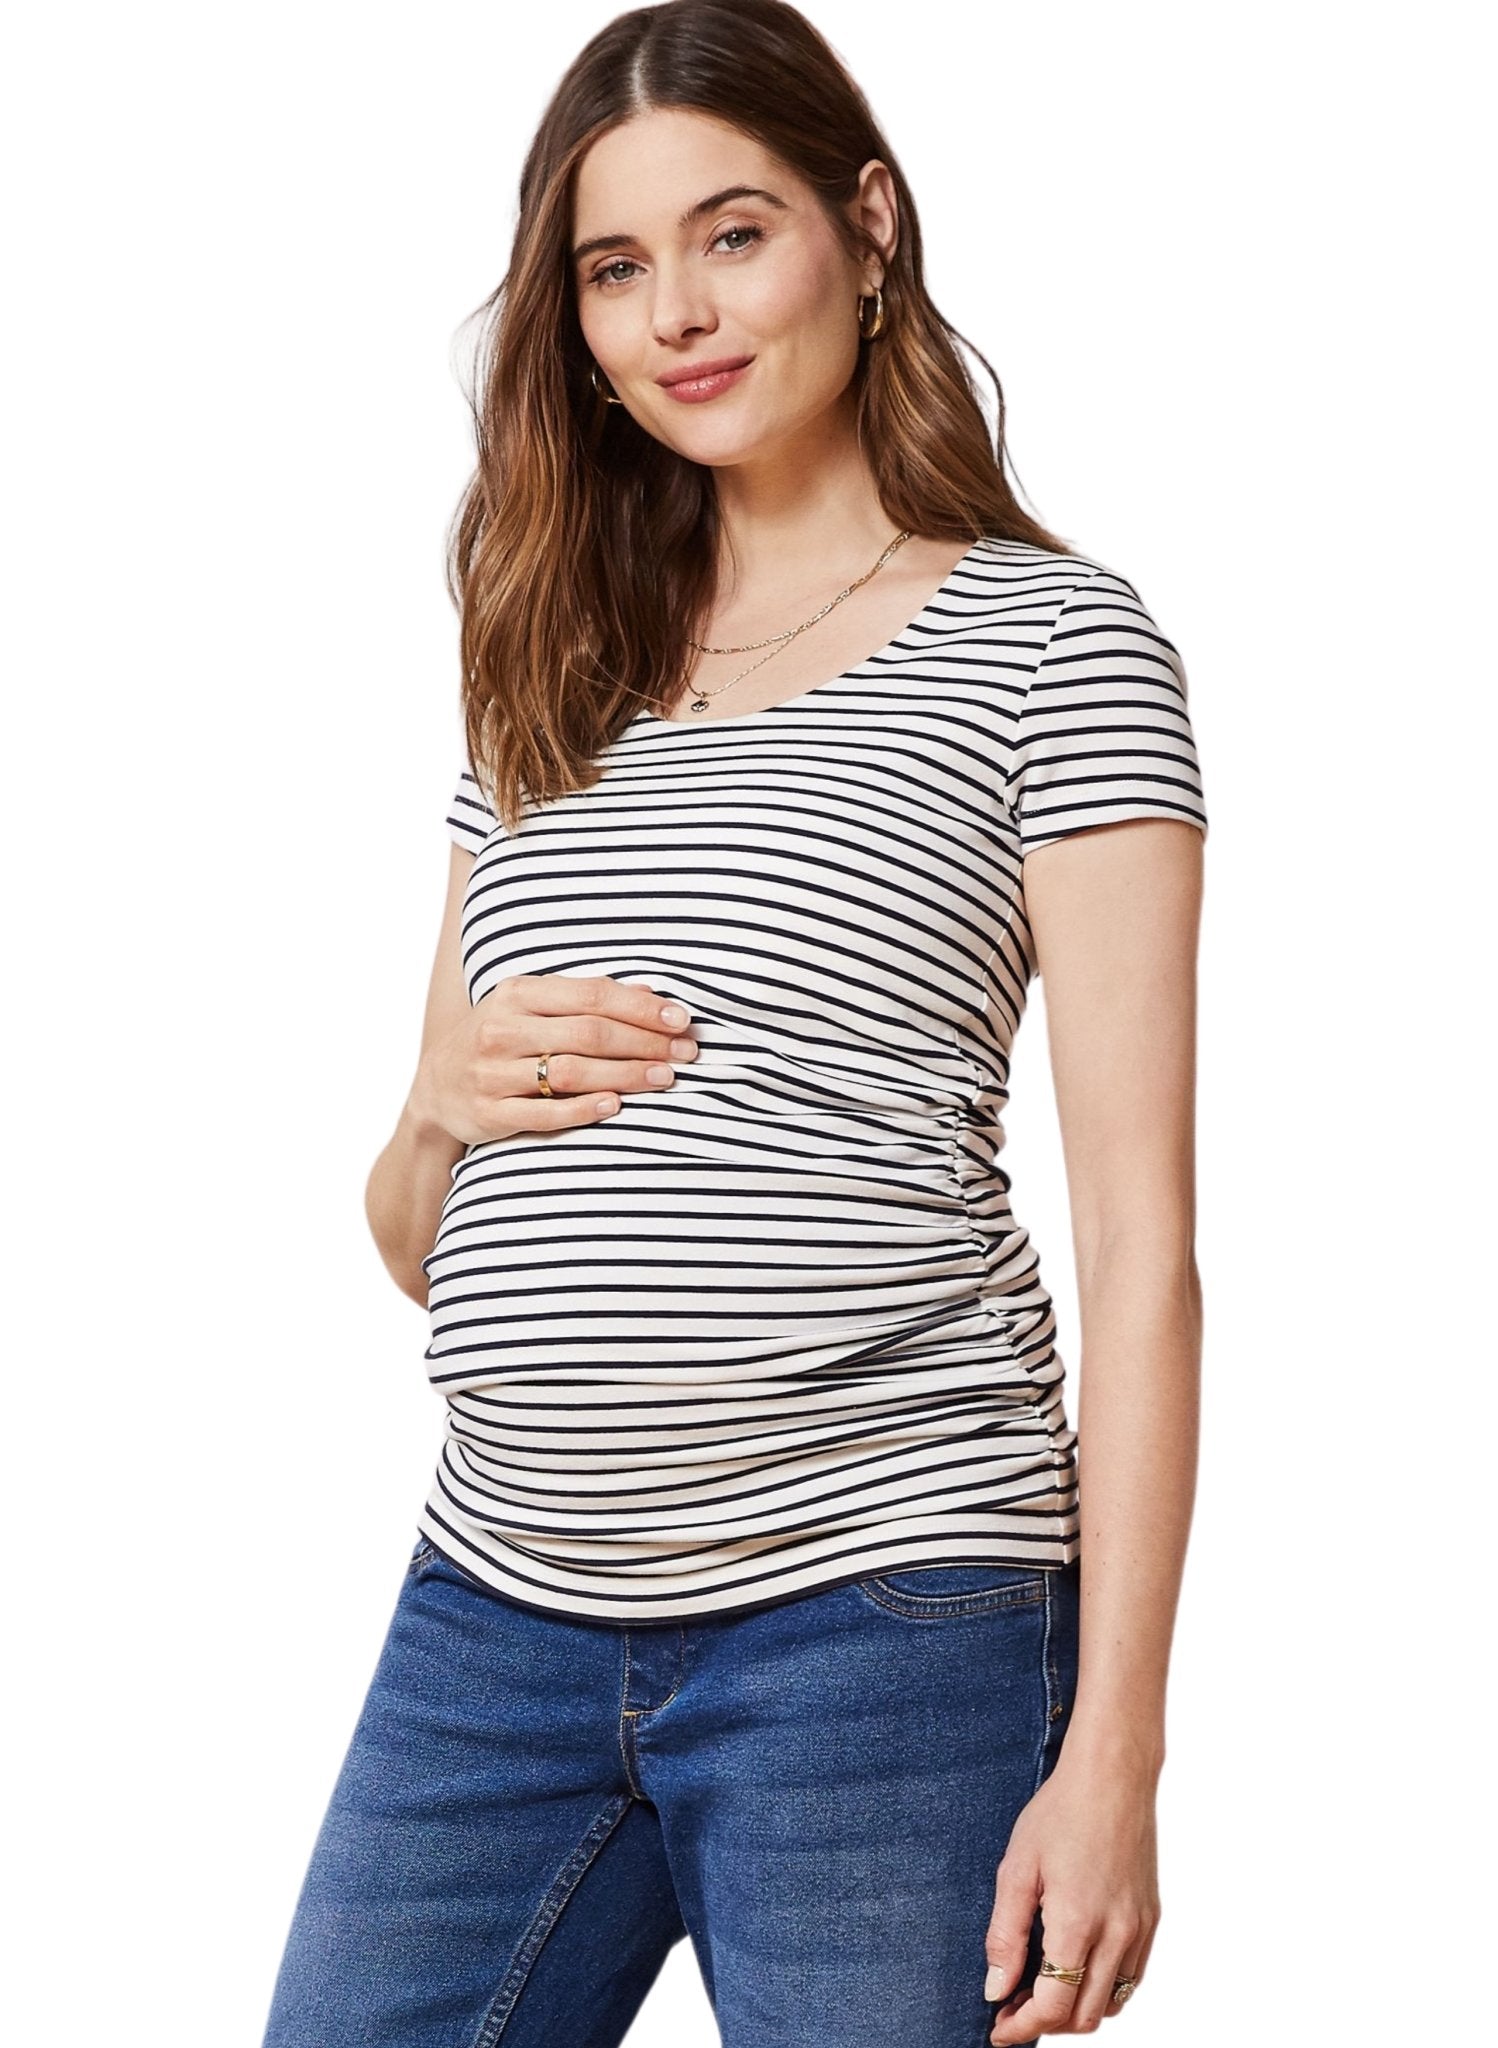 The Maternity Cap Scoop Top - Navy Striped - Mums and Bumps